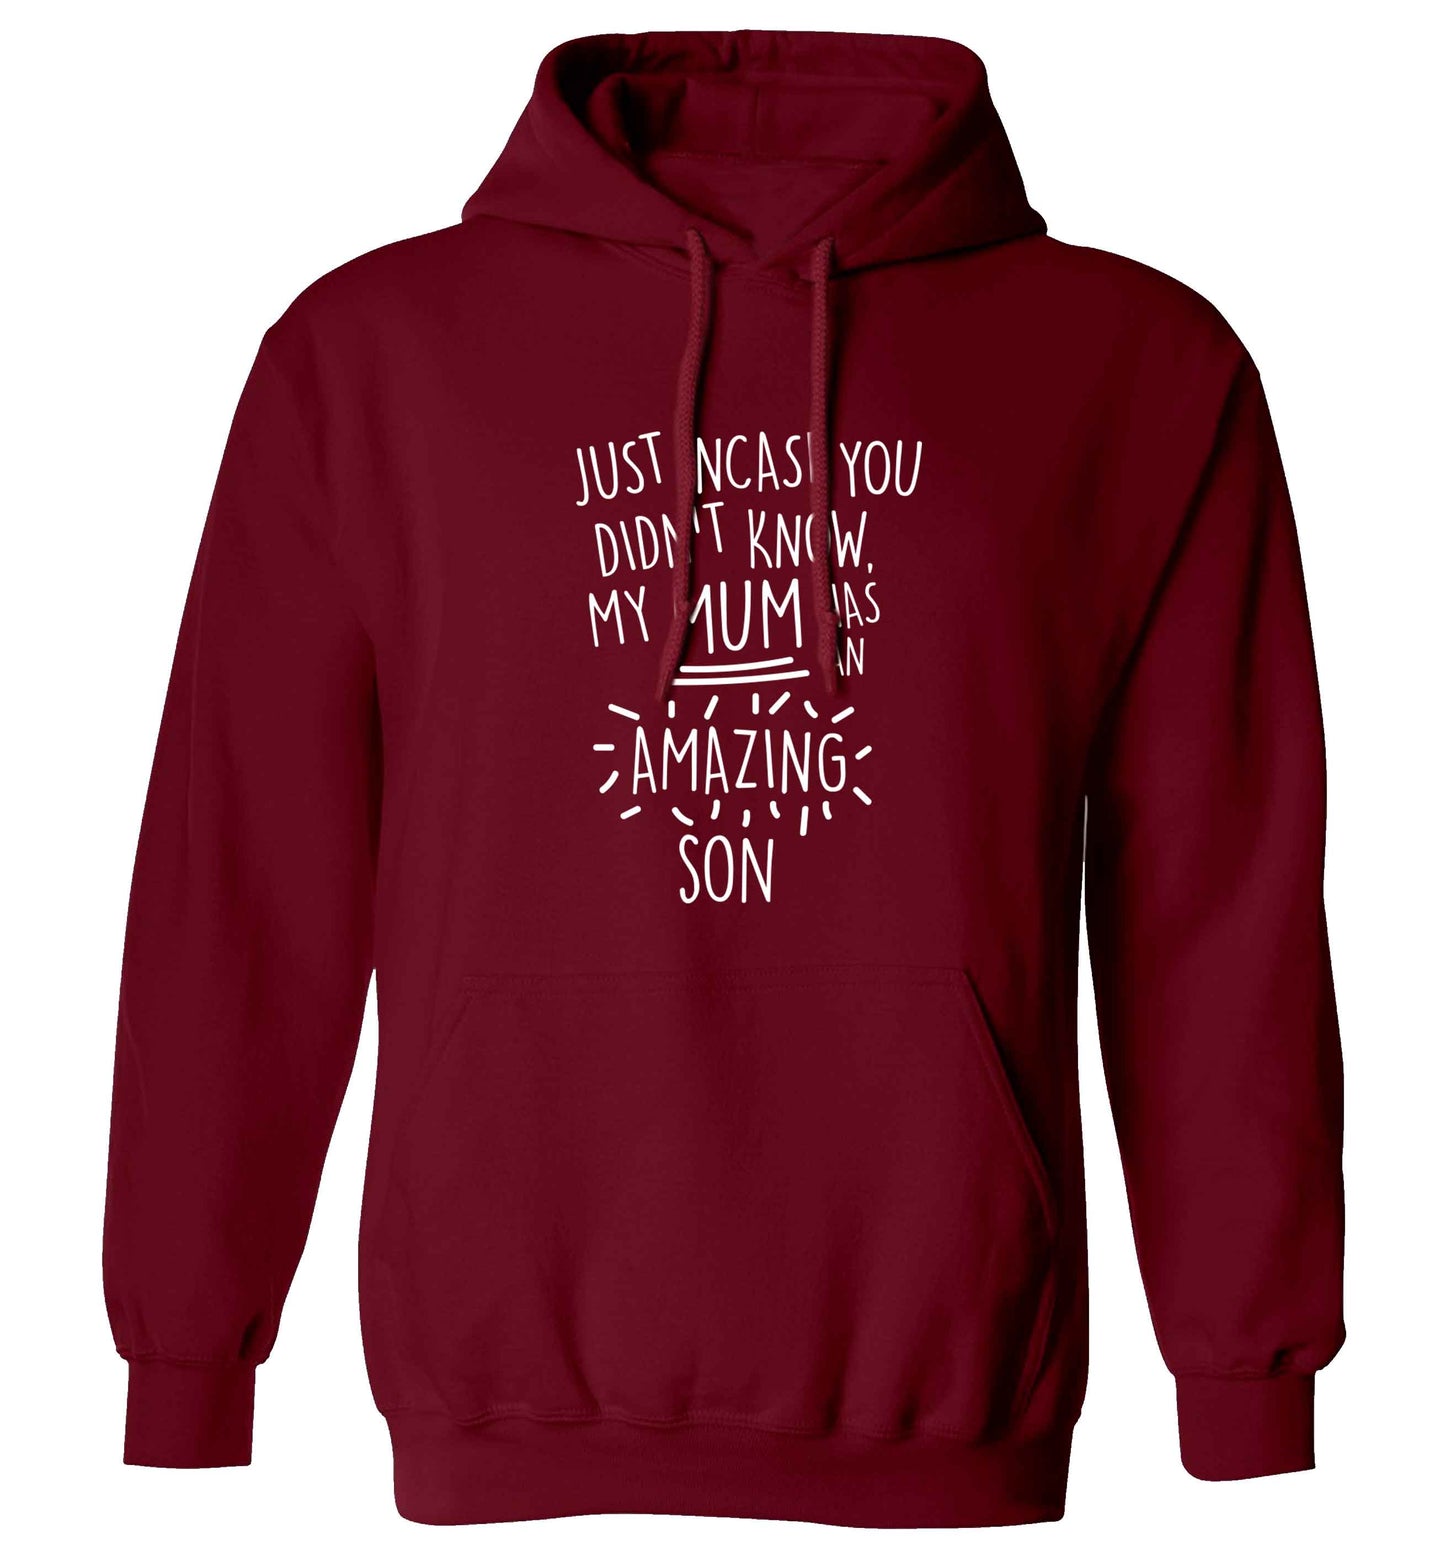 Just incase you didn't know my mum has an amazing son adults unisex maroon hoodie 2XL